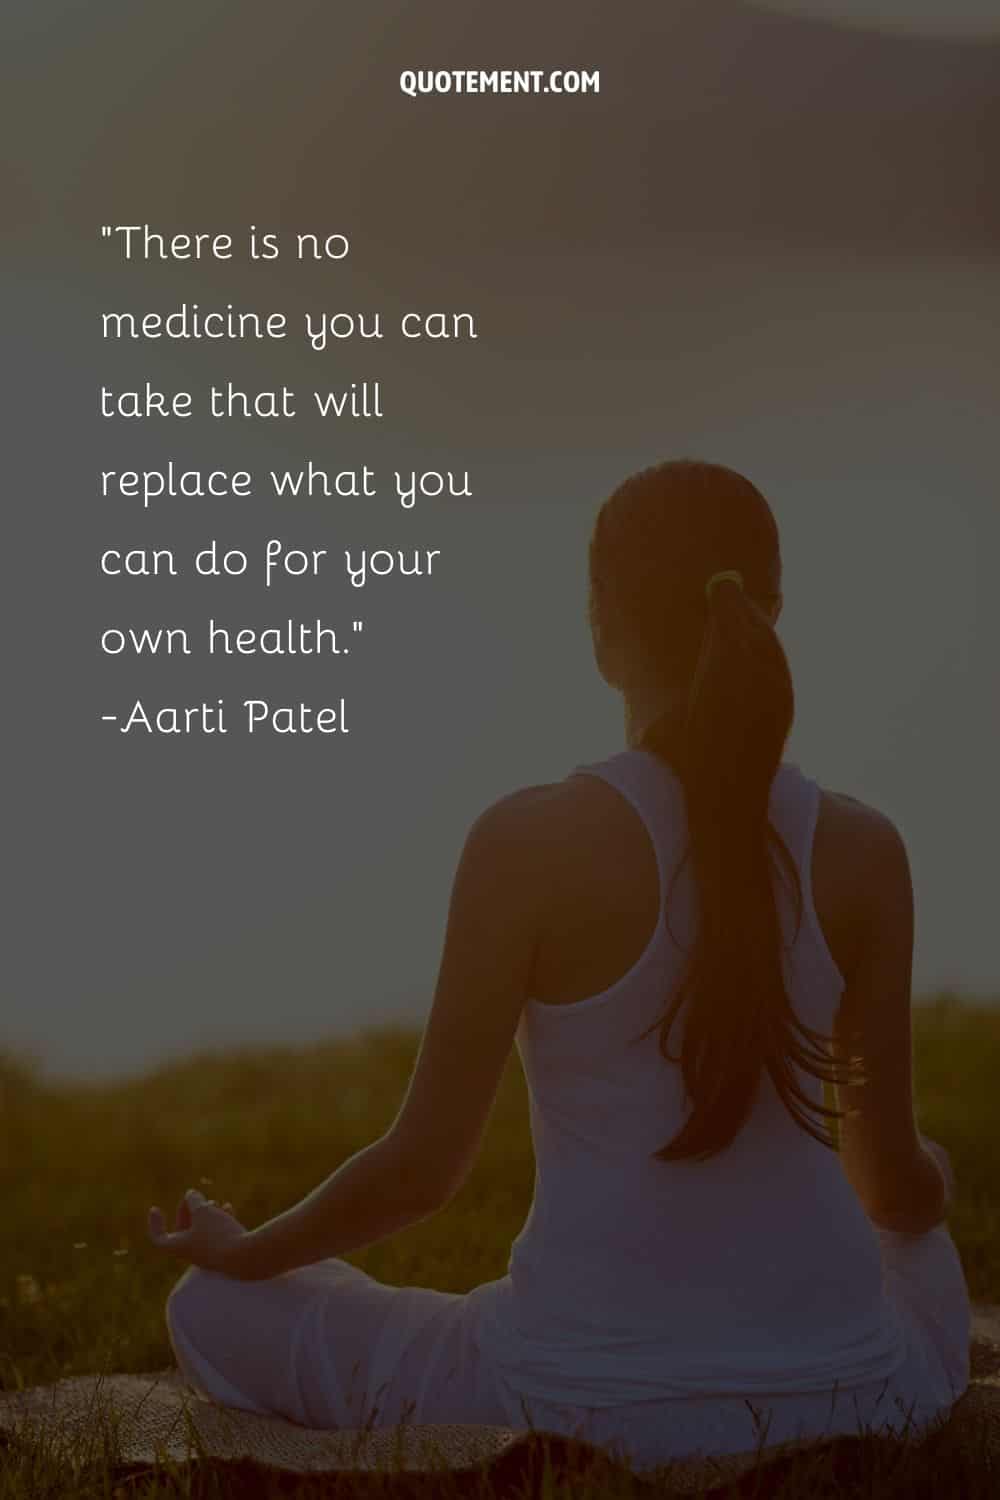 image of woman meditating representing health and wellness quote